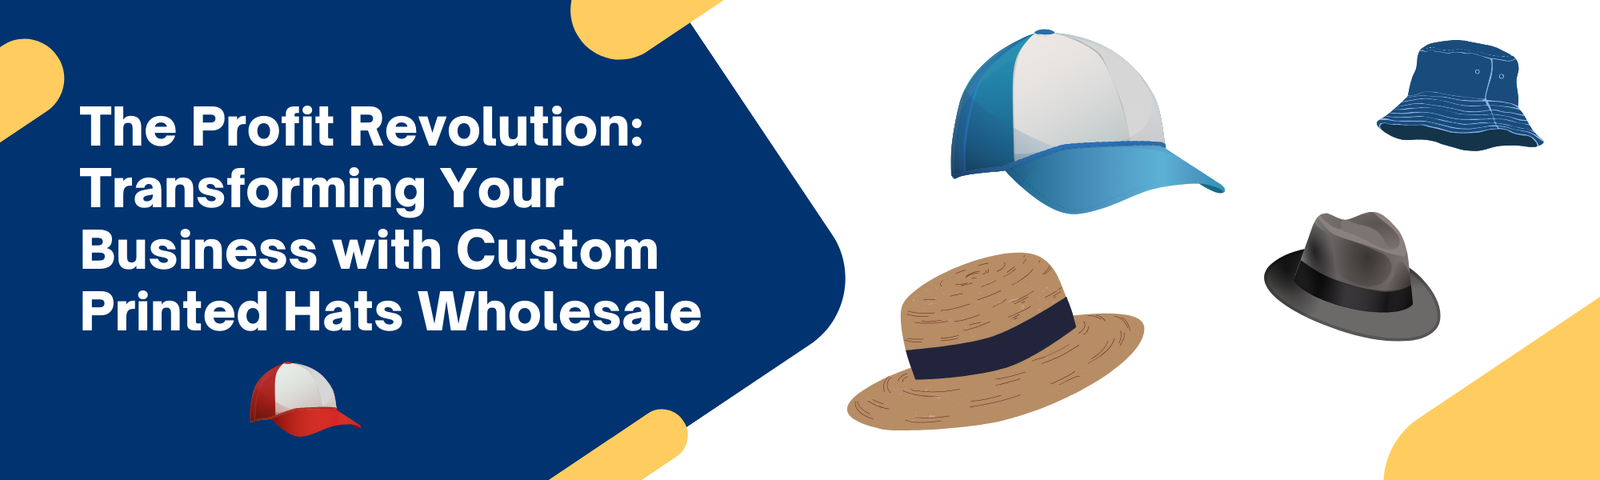 Transforming Your Business with Custom Printed Hats Wholesale